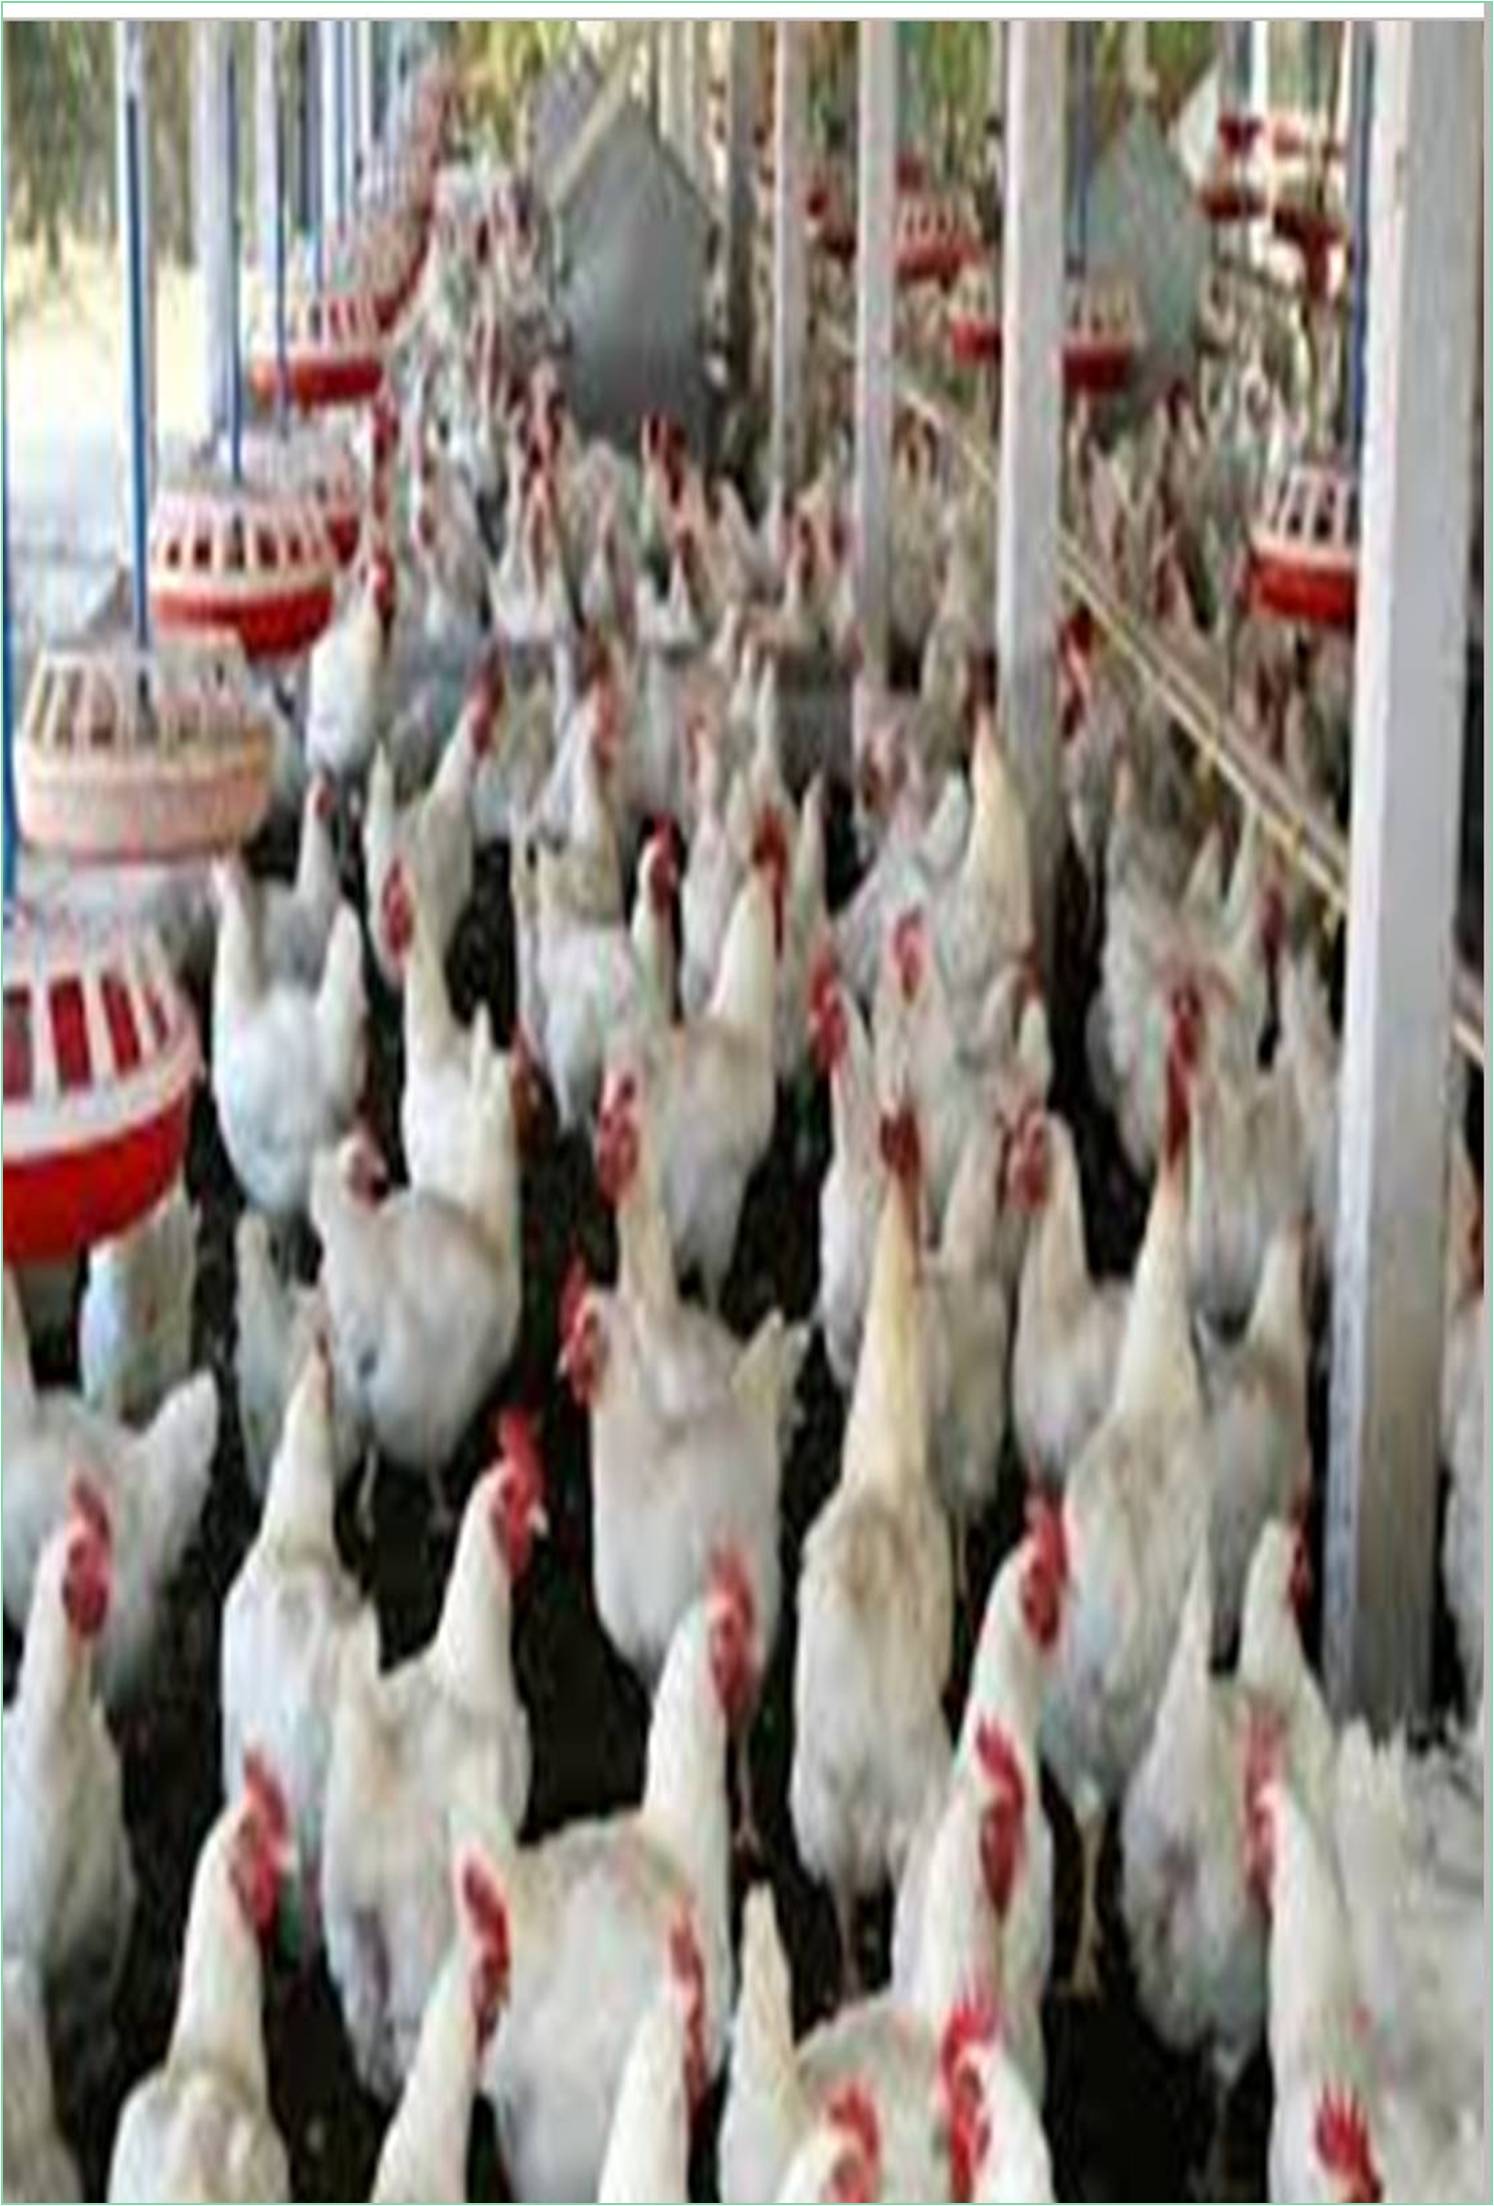 global-journal-of-poultry-farming-and-vaccination-banner.jpg